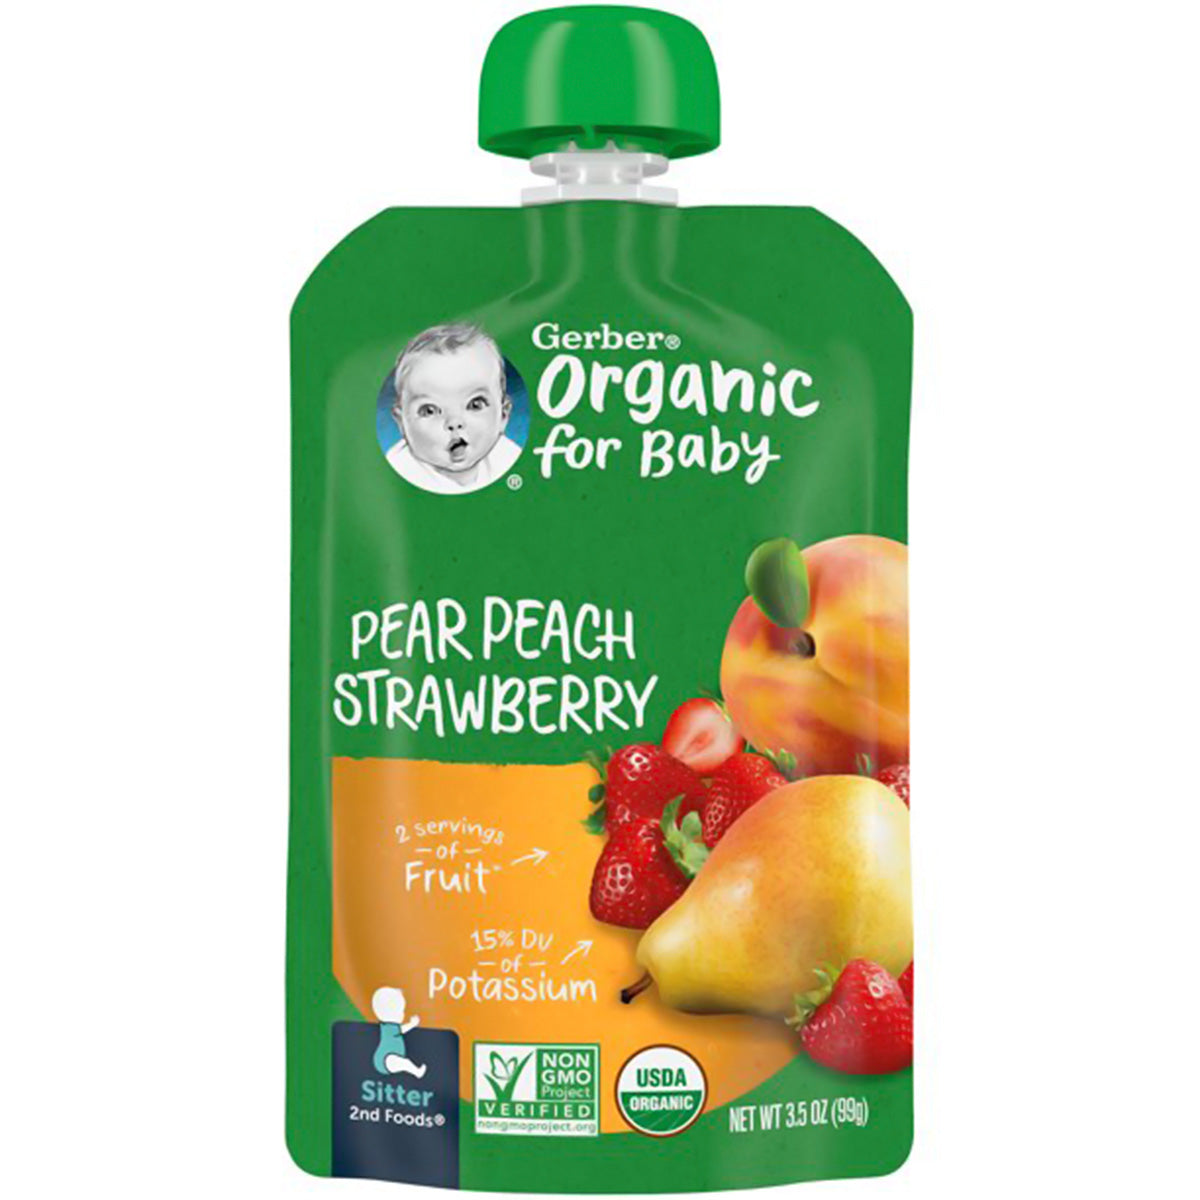 Gerber Organic for Baby, 2nd Foods for Sitter, Pears, Peaches & Strawberries